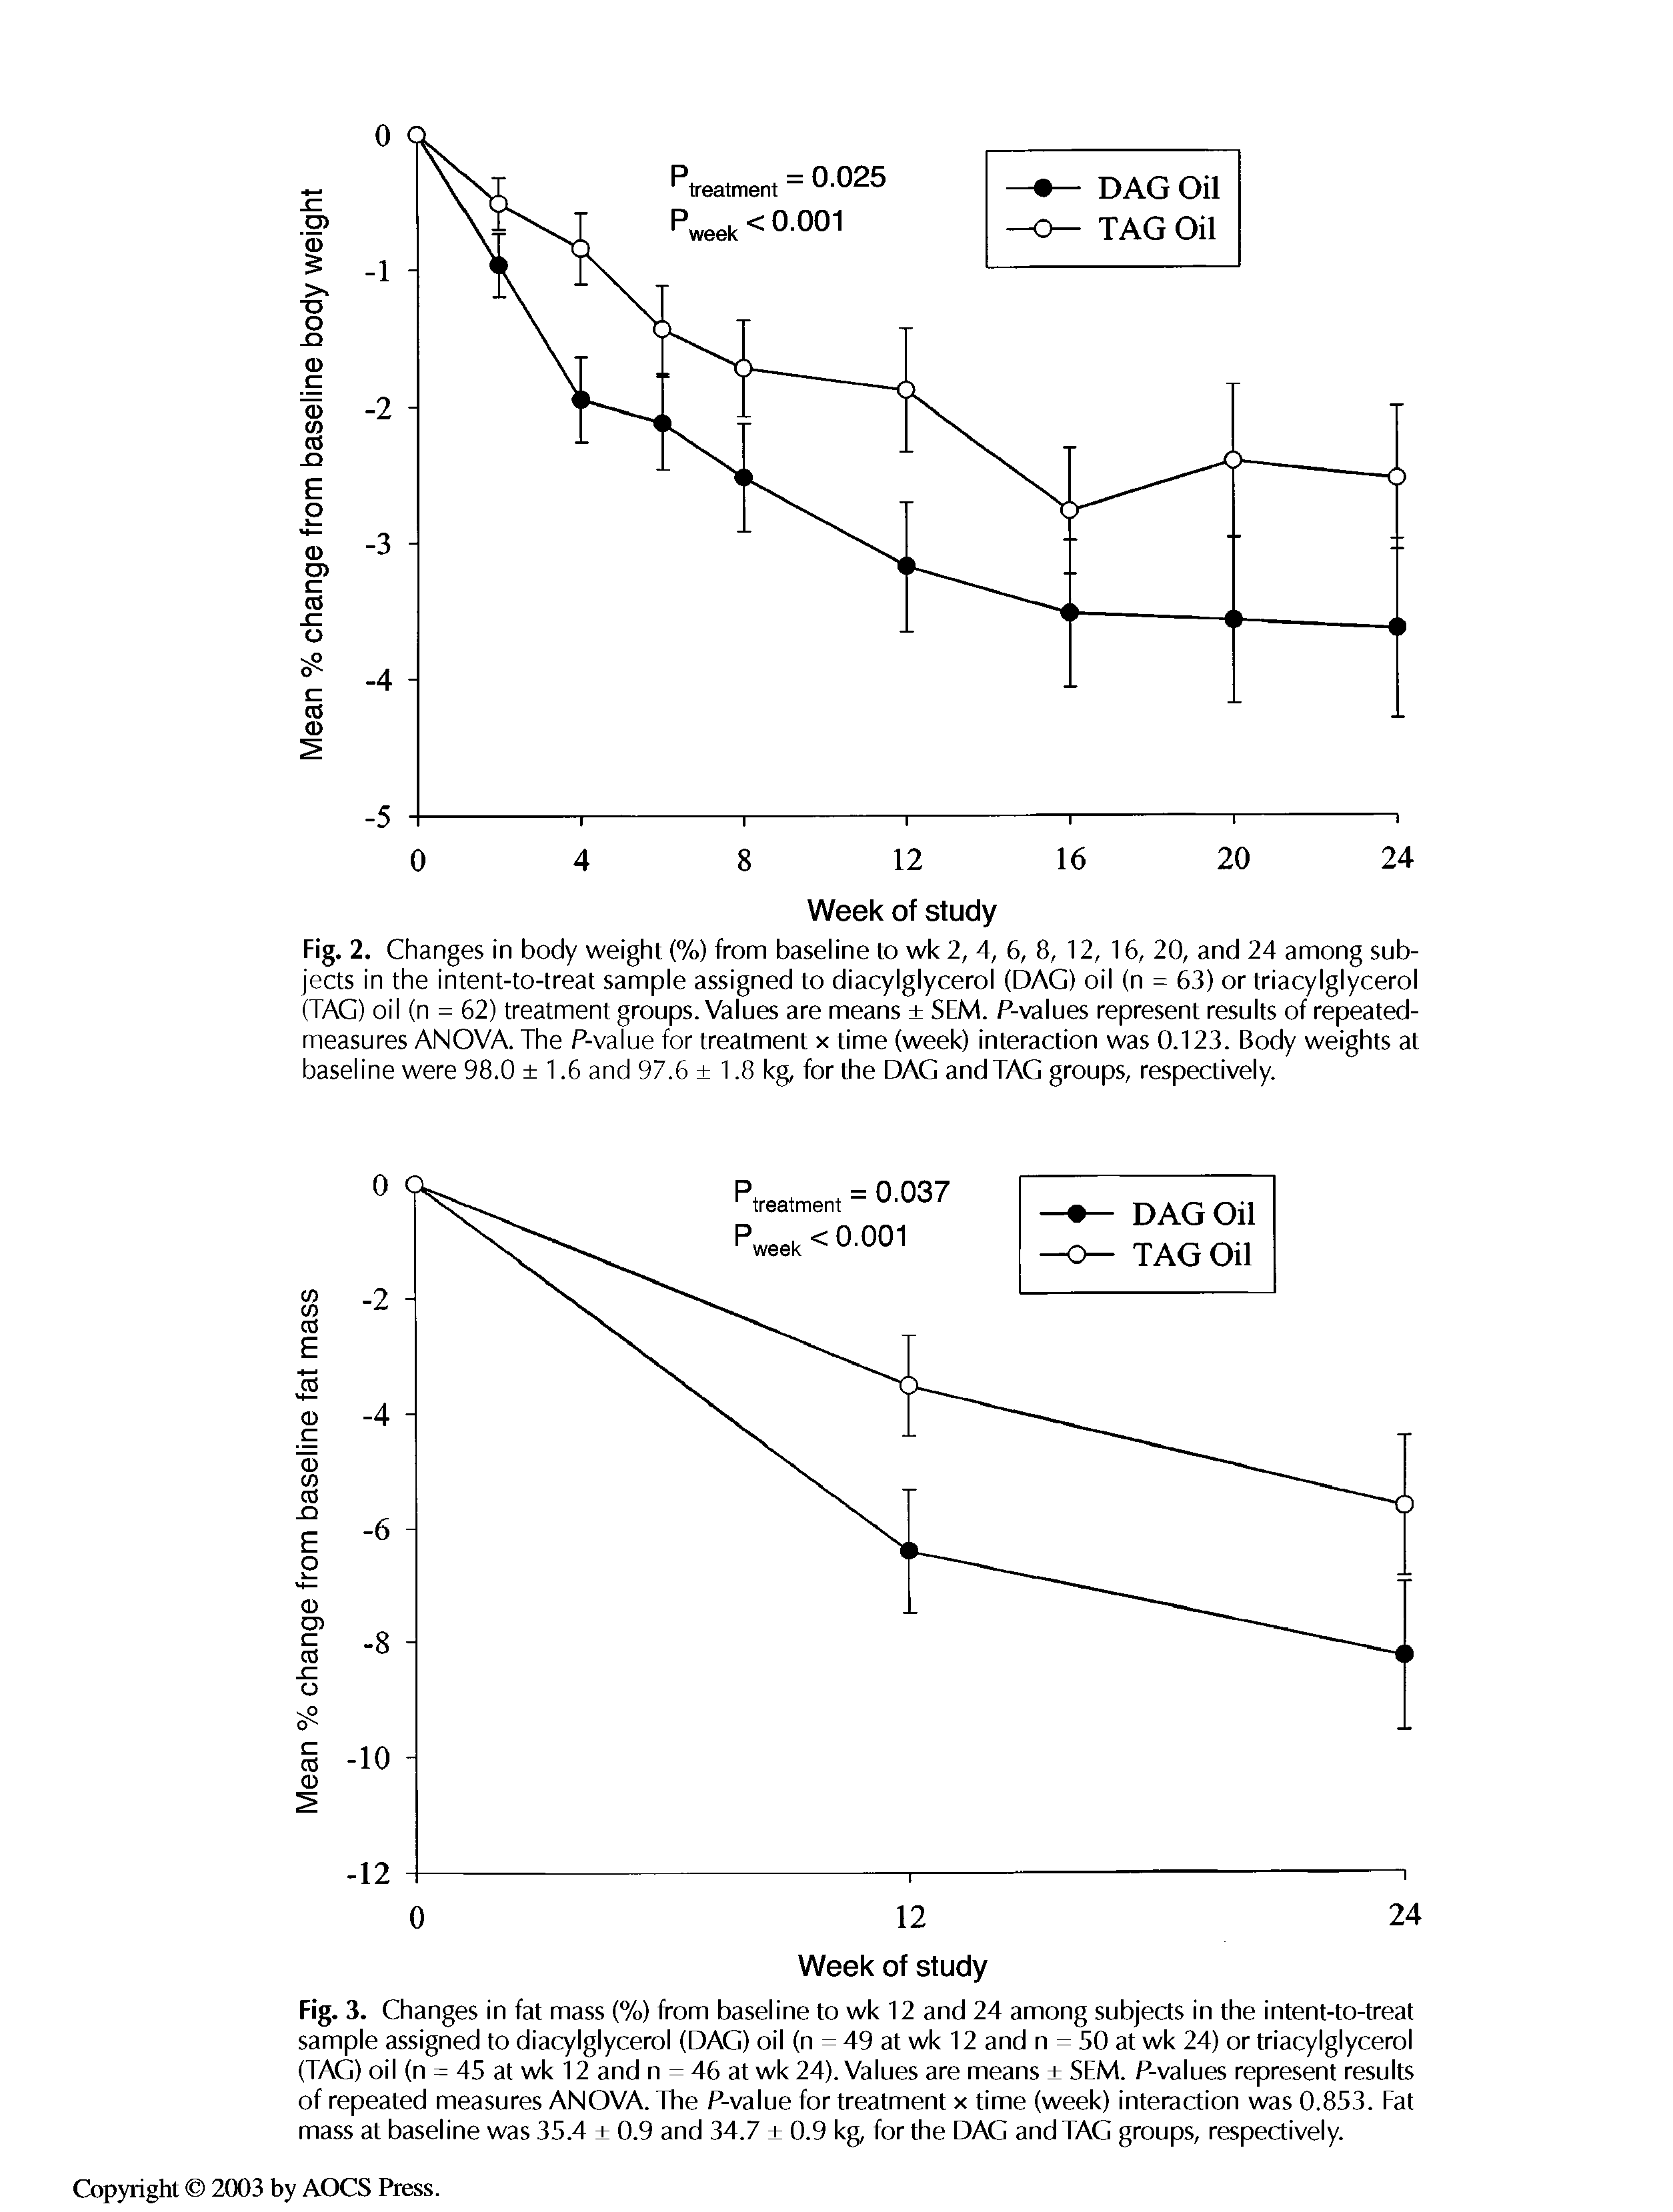 Fig. 2. Changes in body weight (%) from baseline to wk 2, 4, 6, 8, 12, 16, 20, and 24 among subjects in the intent-to-treat sample assigned to diacylglycerol (DAG) oil (n = 63) or triacylglycerol (TAG) oil (n = 62) treatment groups. Values are means SEM. P-values represent results of repeated-measures ANOVA. The P-value for treatment x time (week) interaction was 0.123. Body weights at baseline were 98.0 1.6 and 97.6 1.8 kg, for the DAG andTAG groups, respectively.